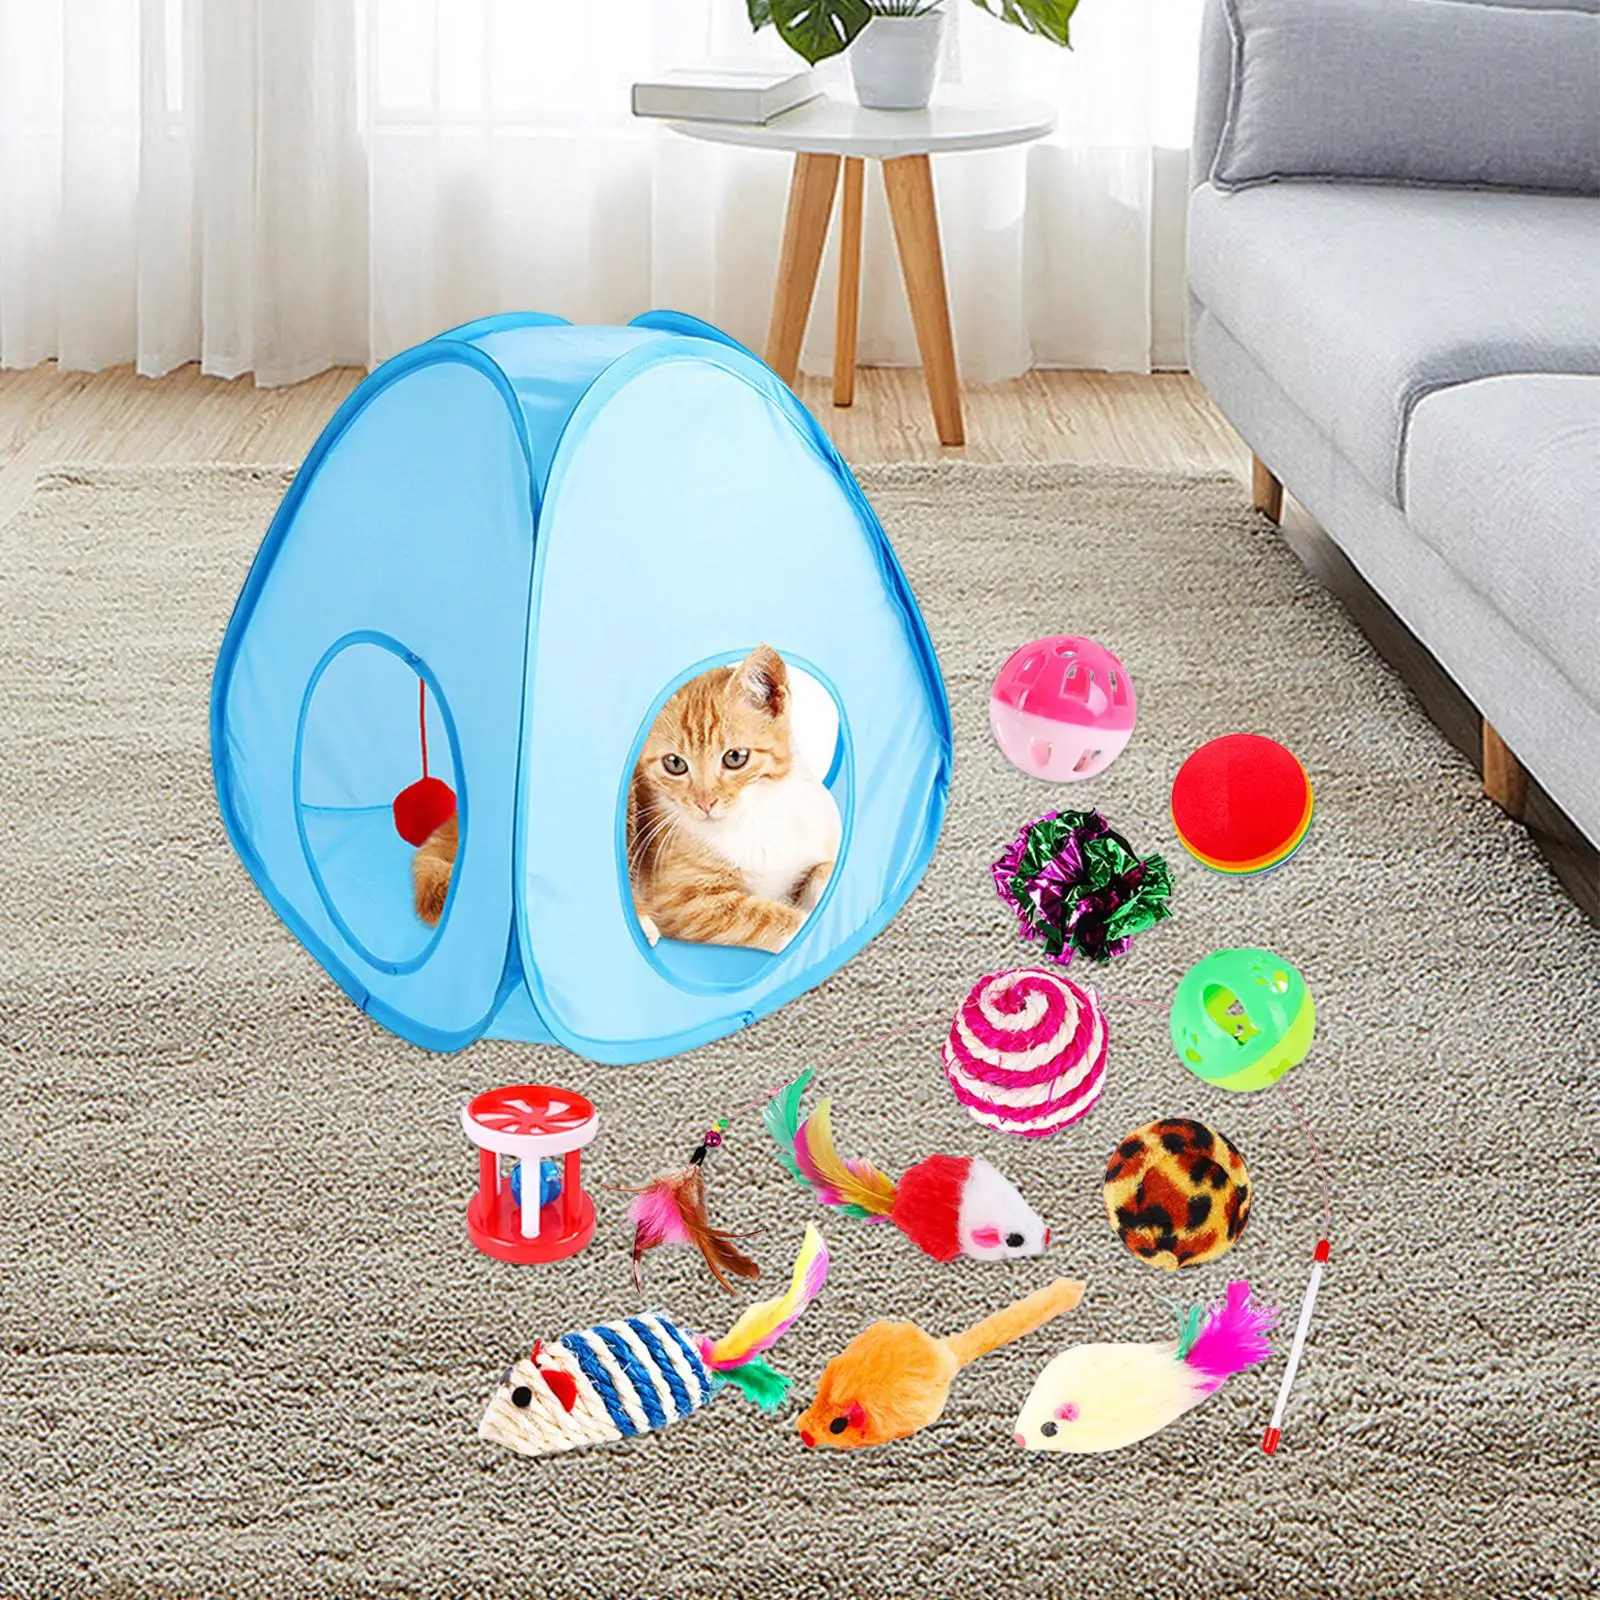 13Pcs Cat Toys Interactive Toy Mouse Colorful Mouse Pet Lightweight Cat House Tunnel for Chasing Small Animals Scratching